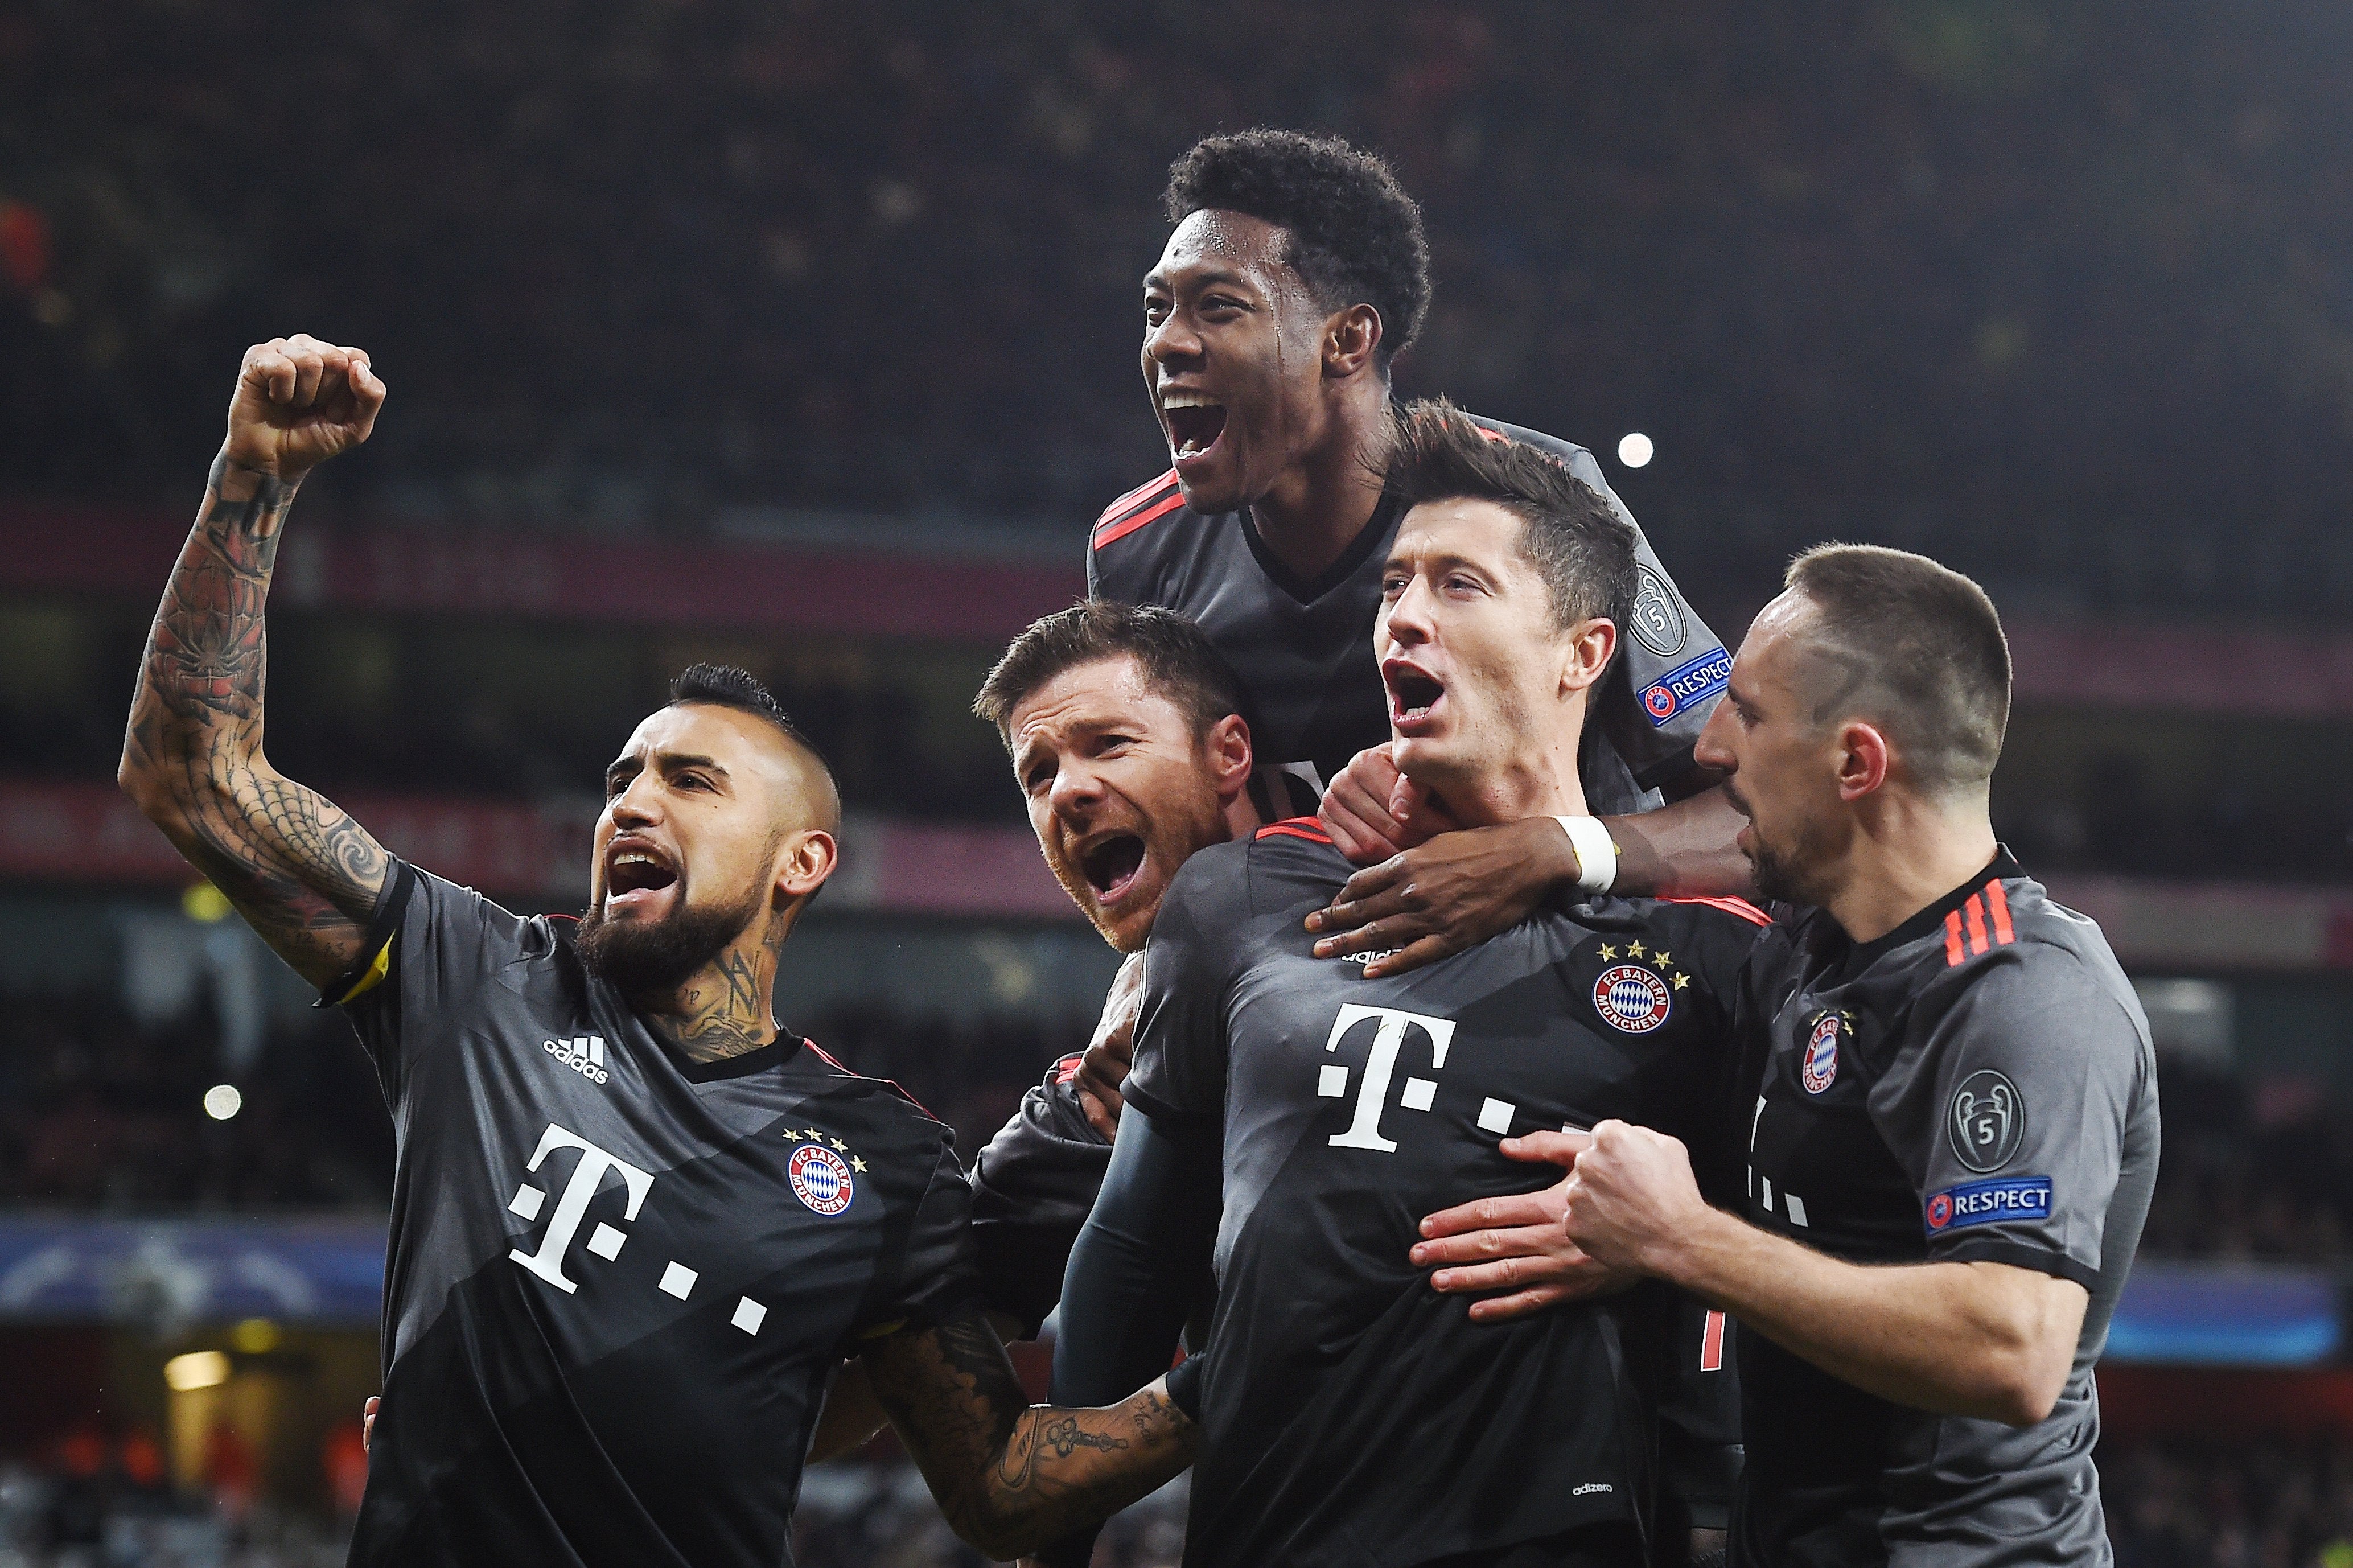 Back in 2017, Bayern beat Arsene Wenger’s Arsenal 5-1 in Munich and repeated that scoreline in north London